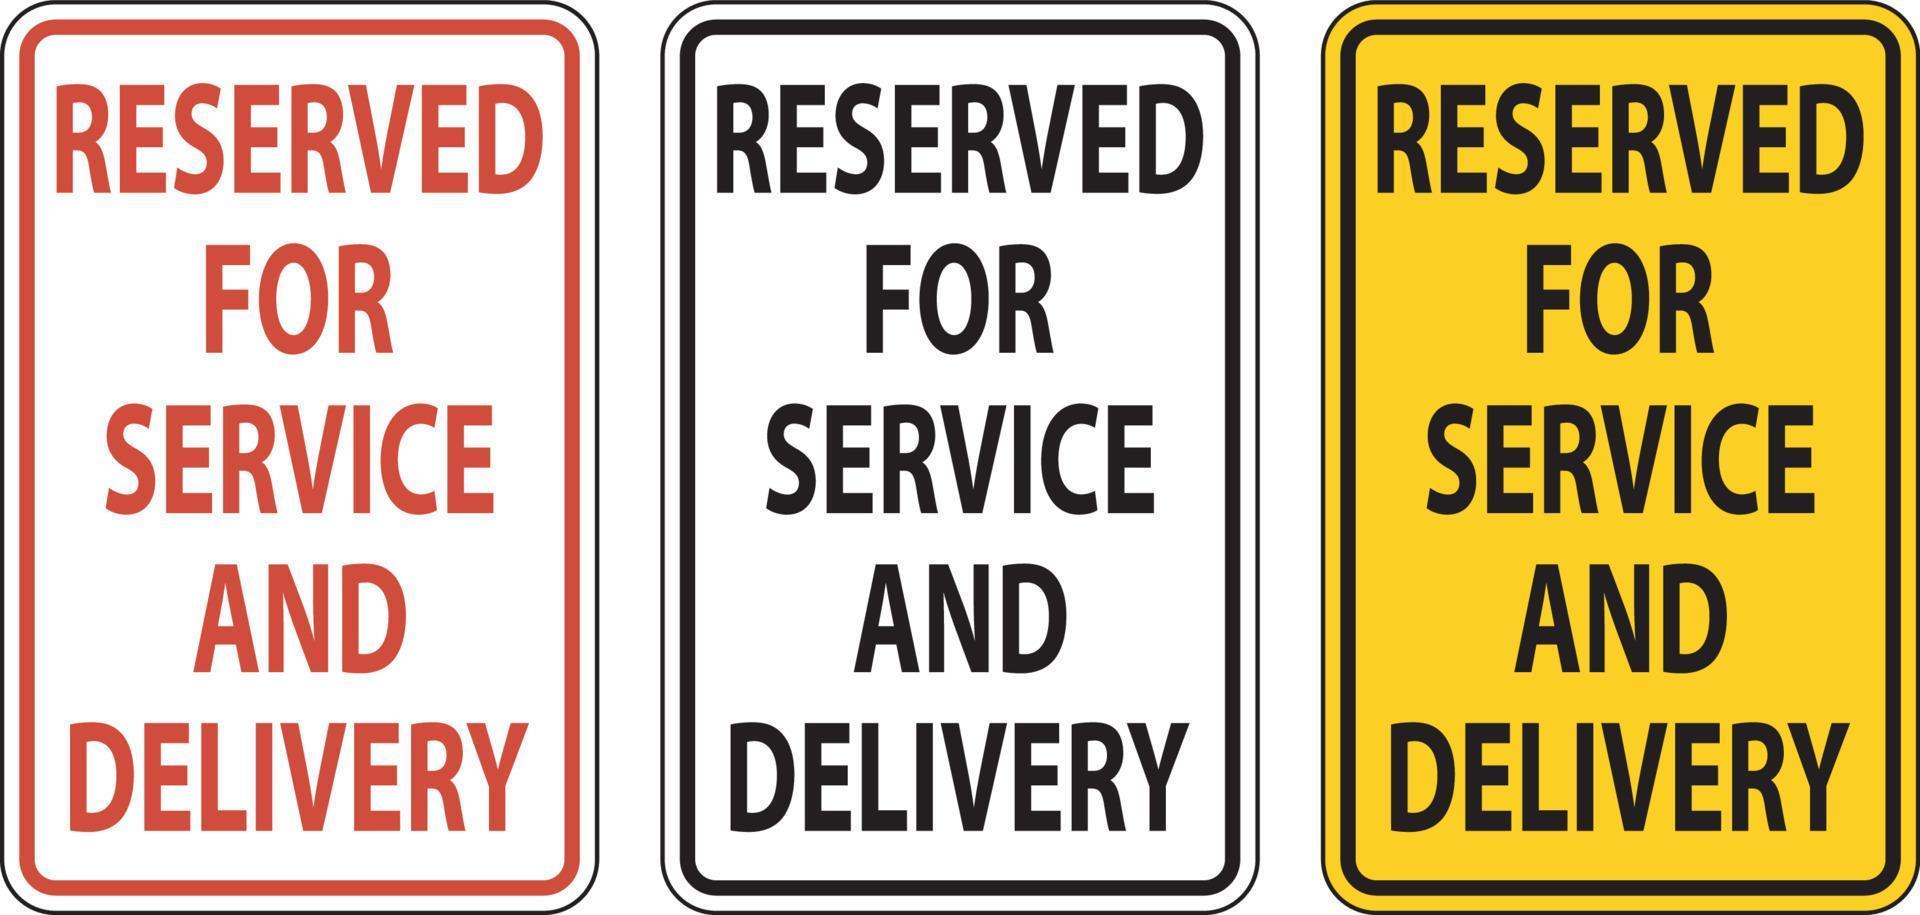 Reserved For Service and Delivery Sign On White Background vector